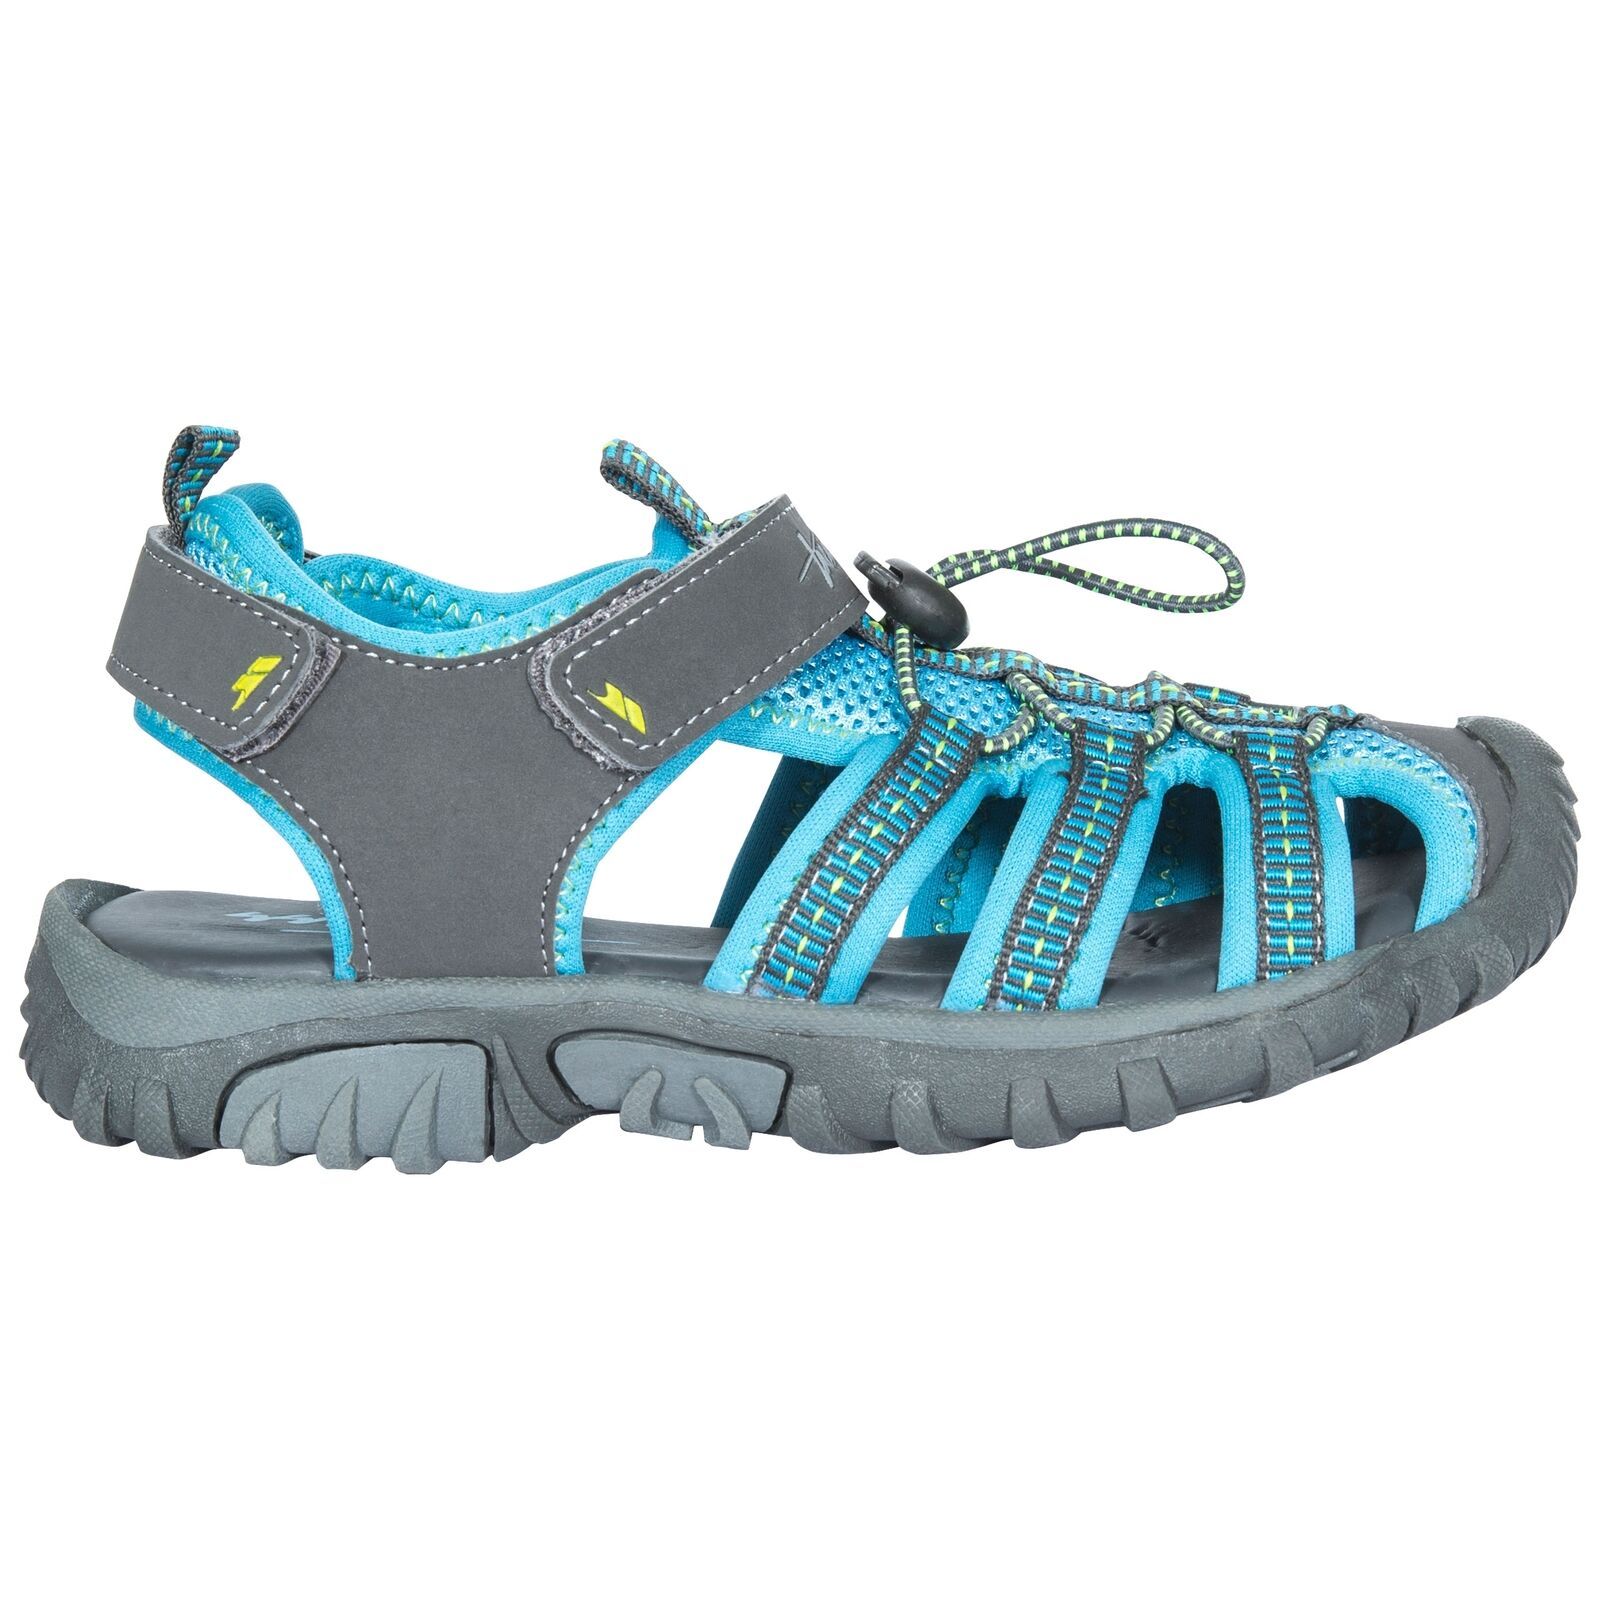 Kids protective active sandal. Closed toe. Adjustable ankle and instep straps. Adjustable pull cord. Cushioned and moulded footbed. Durable multi-purpose outsole. Upper: PU/Mesh/Textile webbing, Lining: Spandex, Outsole: TPR.